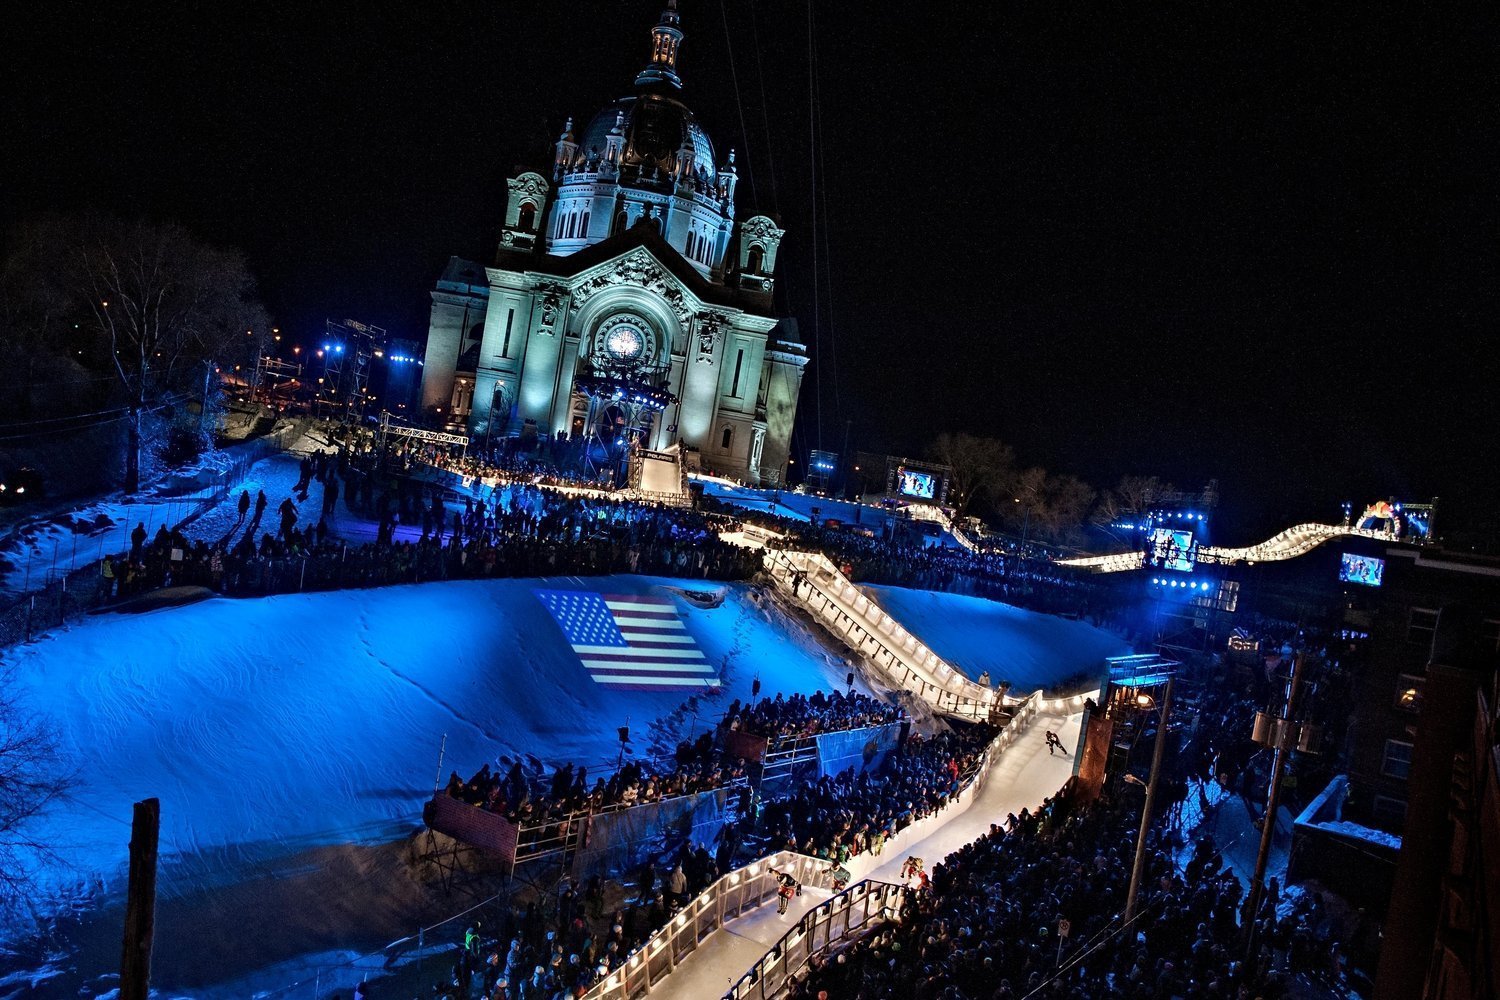 Crashed Ice, Saint Paul, Feb 2627, 2016 Visit Inver Grove Heights